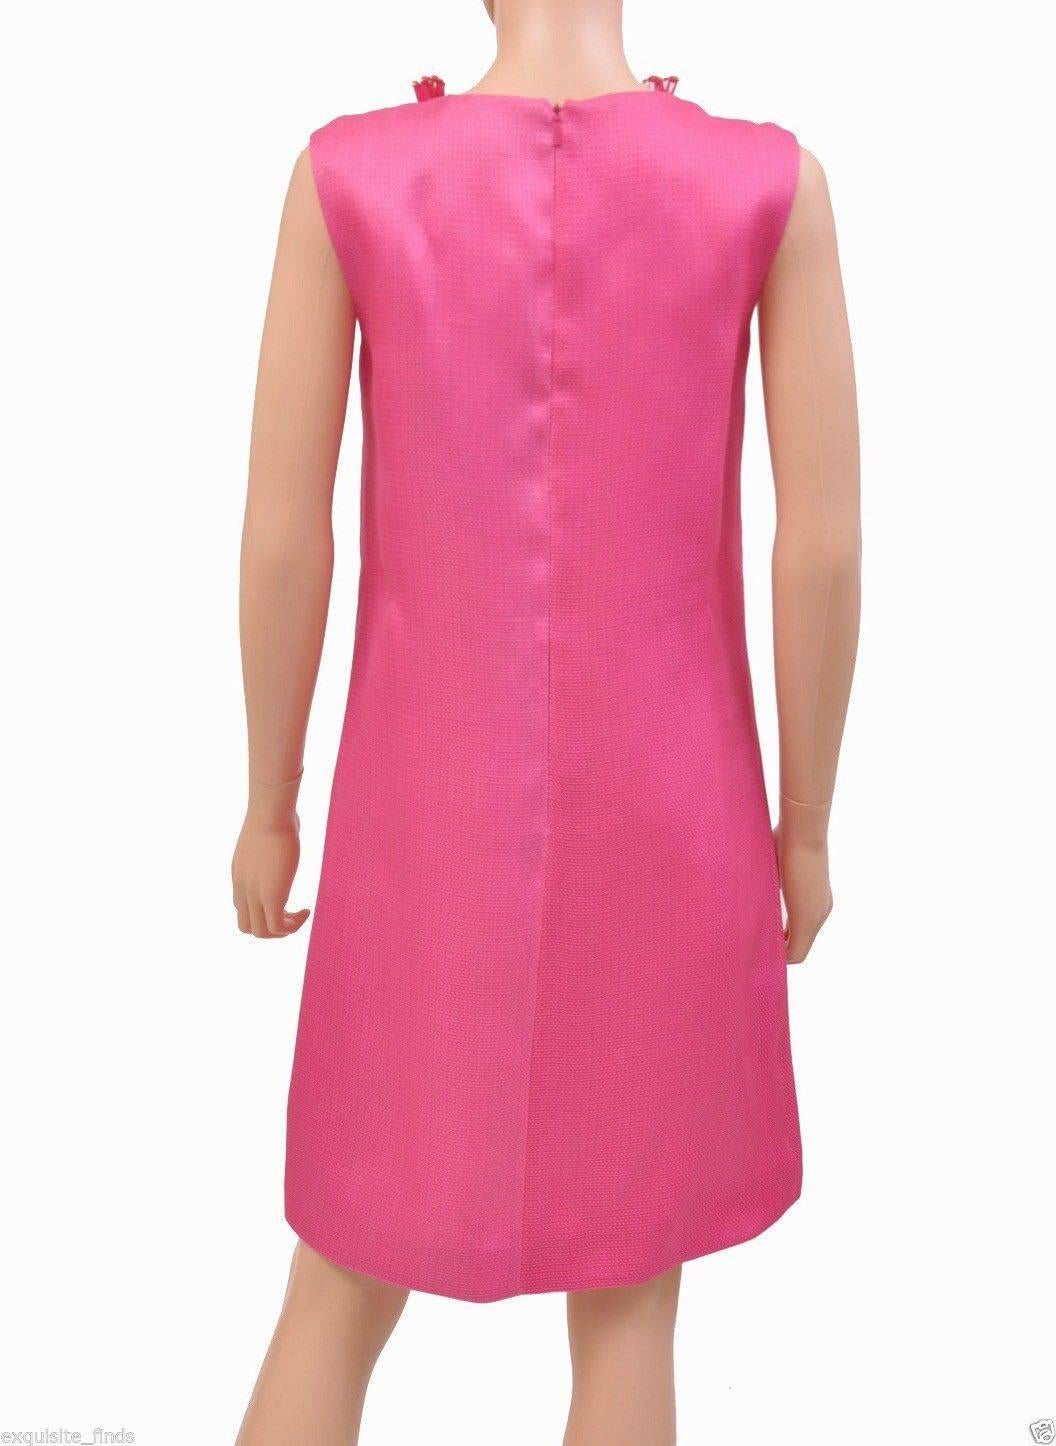 New GUCCI HOT PINK RAFFIA DRESS with FLORAL EMBROIDERY 1